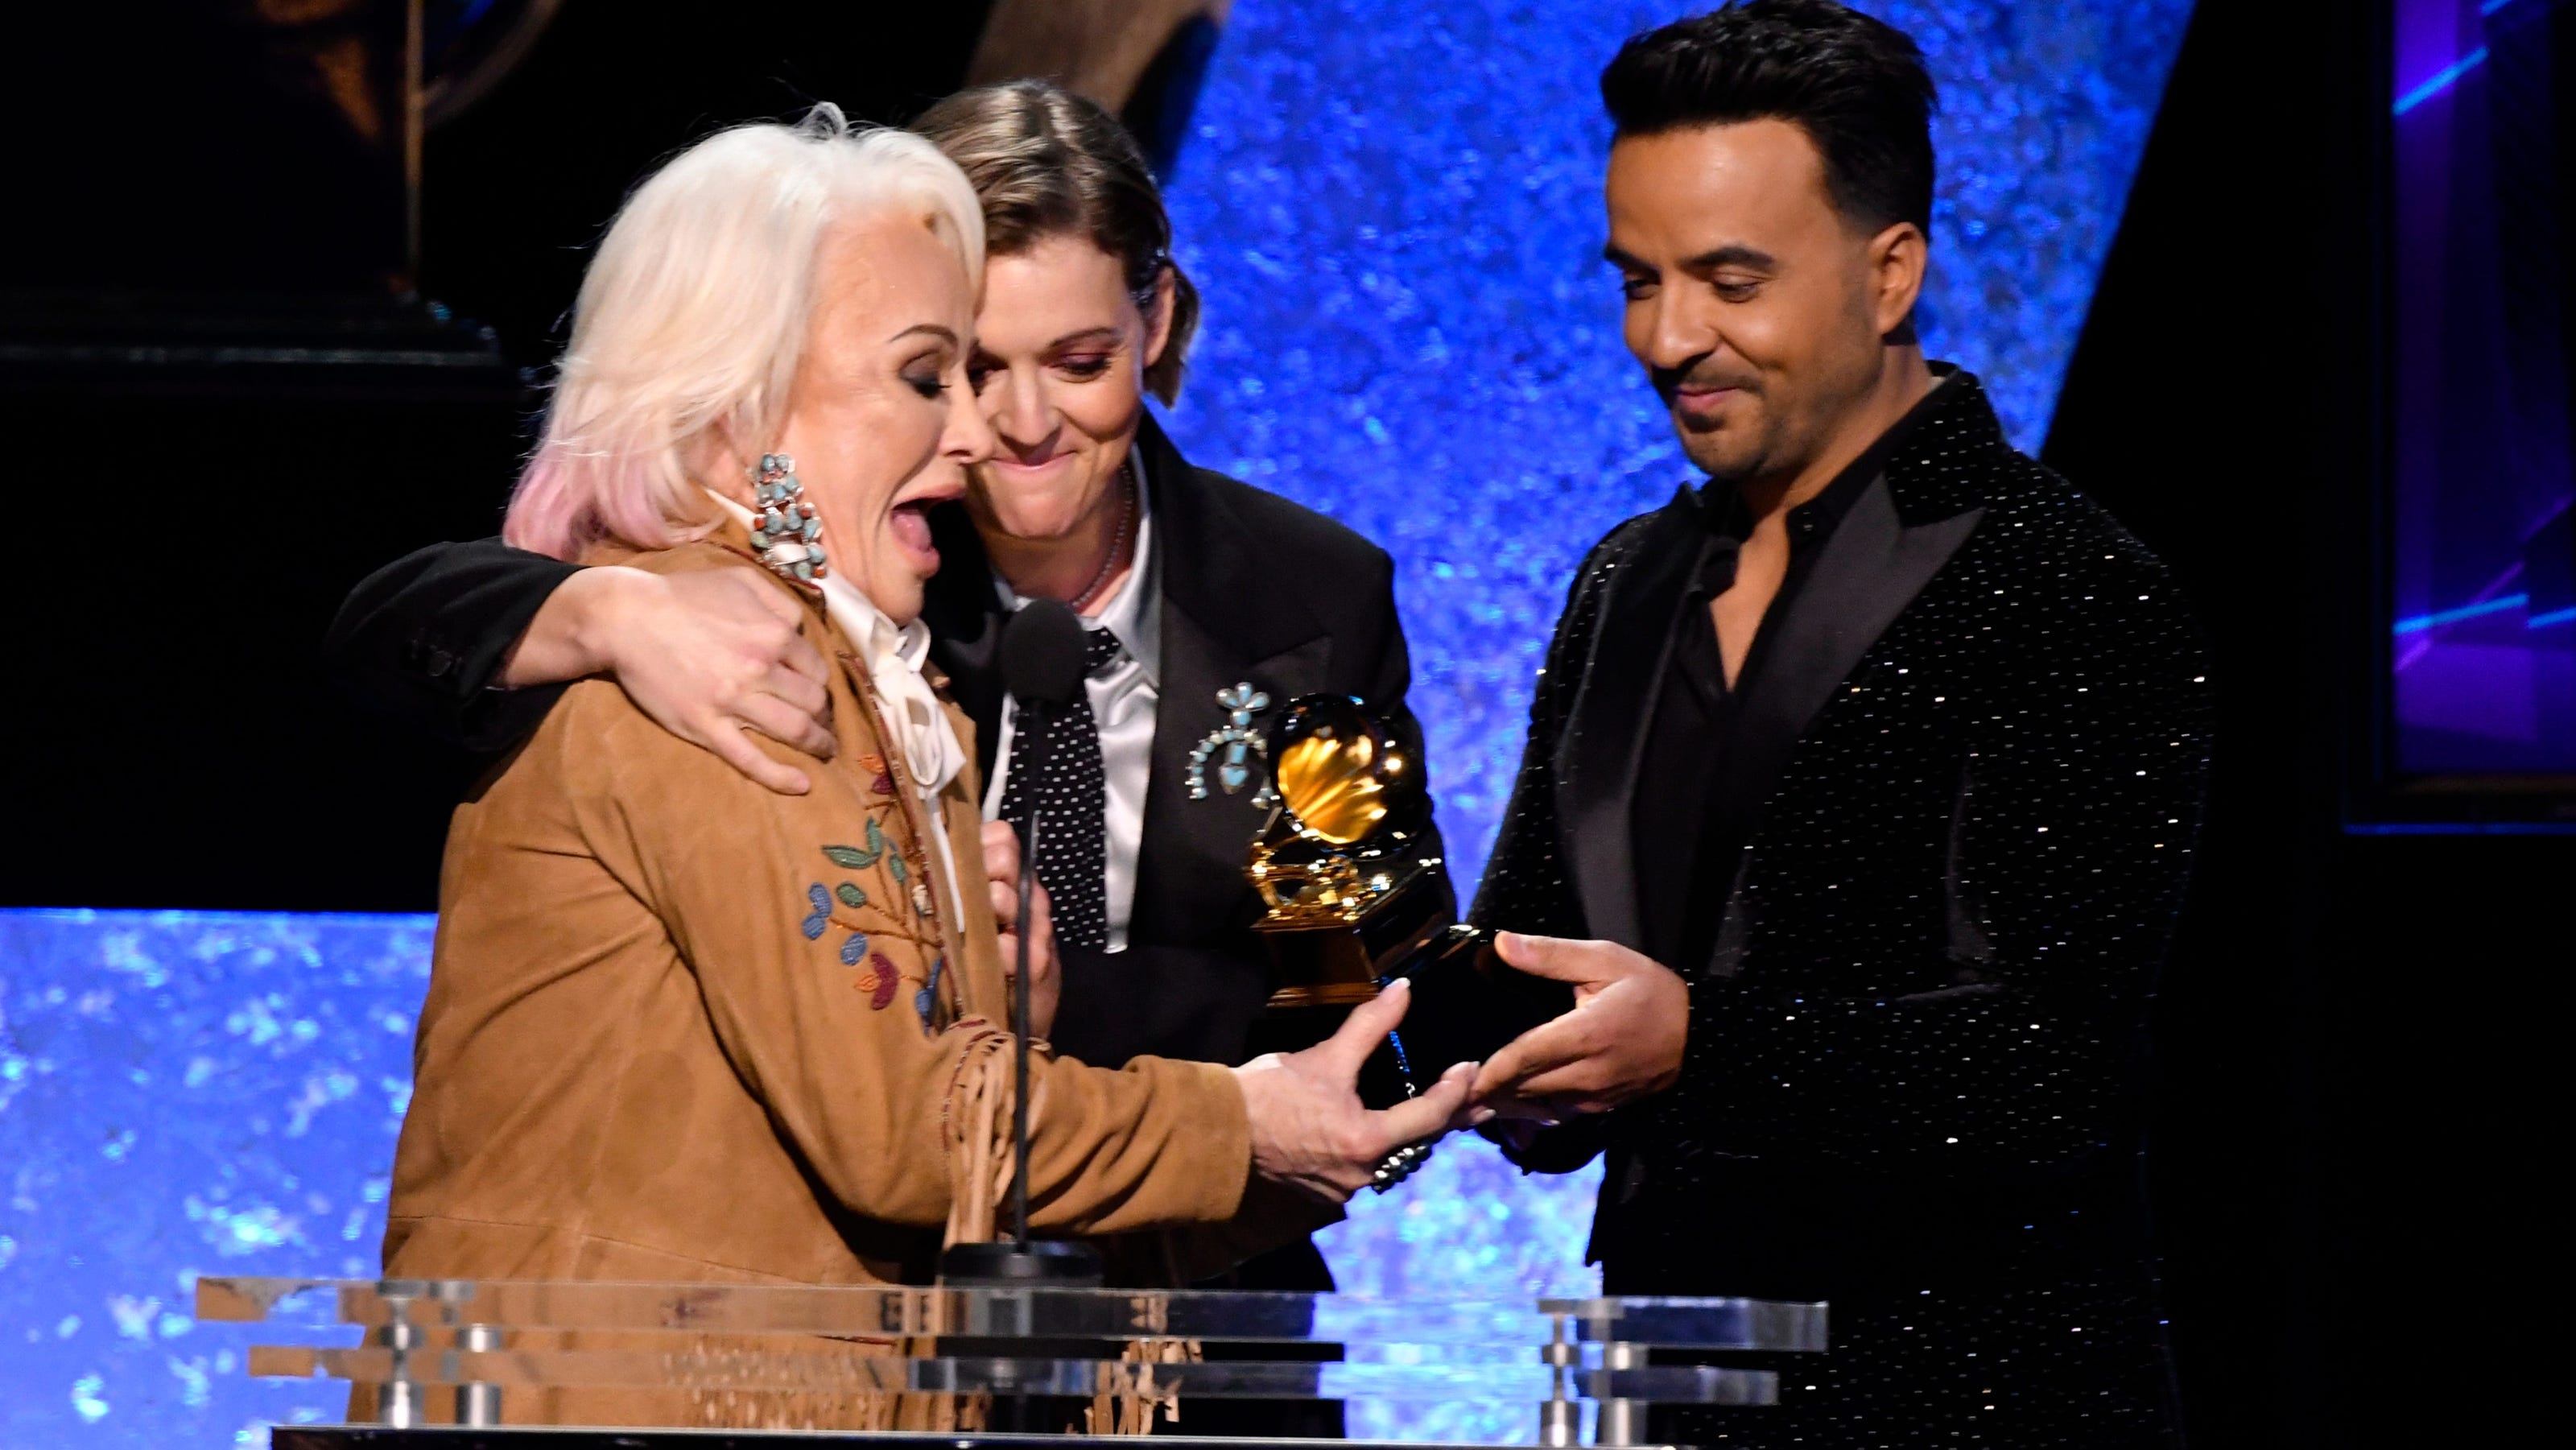 Tanya Tucker wins her firstever Grammys for best country album, song